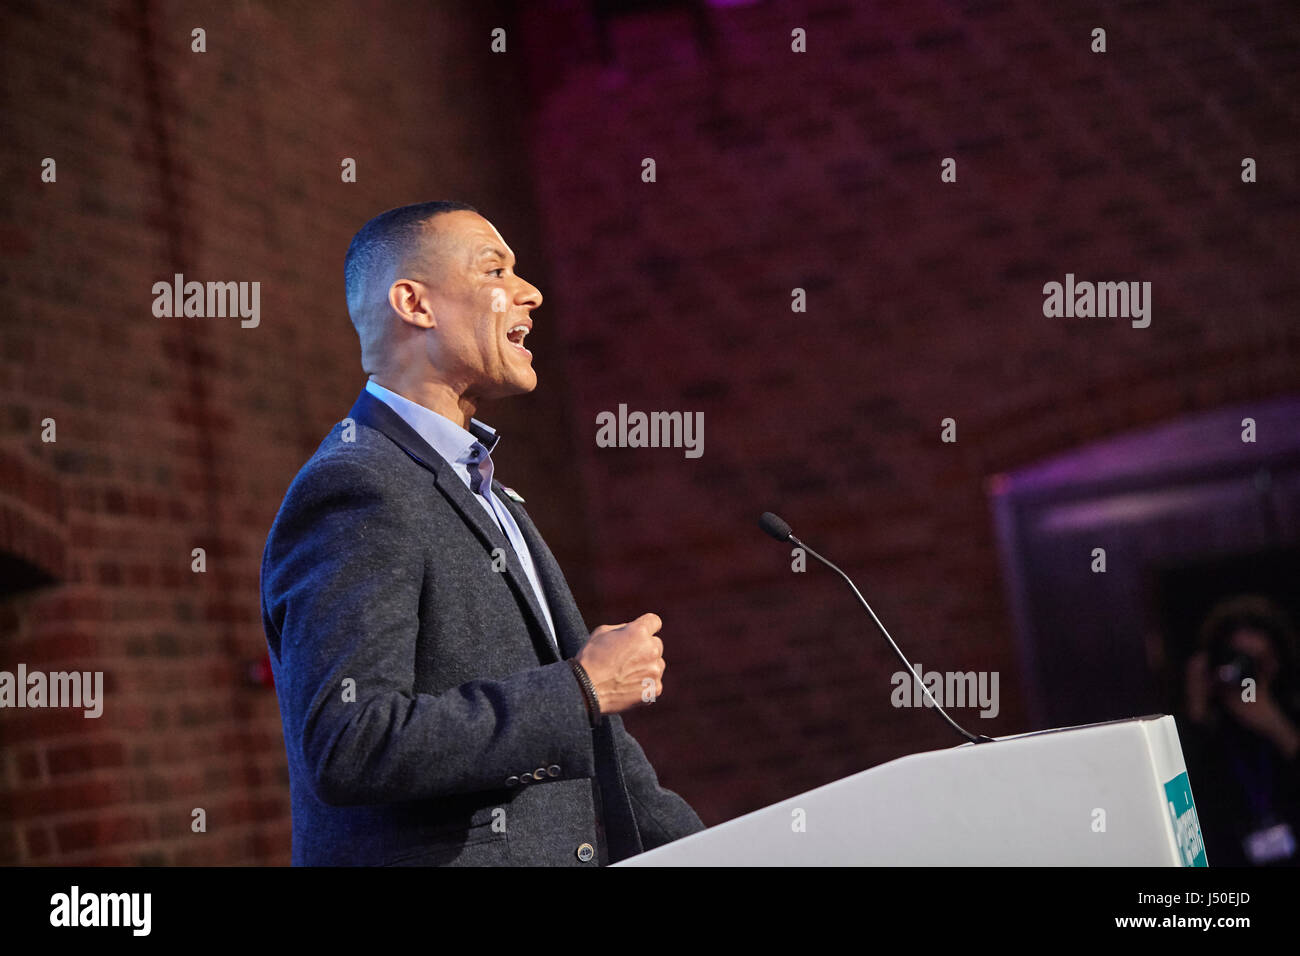 London, UK. 15th May, 2017. Progressive Alliance launch event held at the Brewery, Barbican, London,UK. 15th May 2017 Credit: Sam Barnes/Alamy Live News Stock Photo